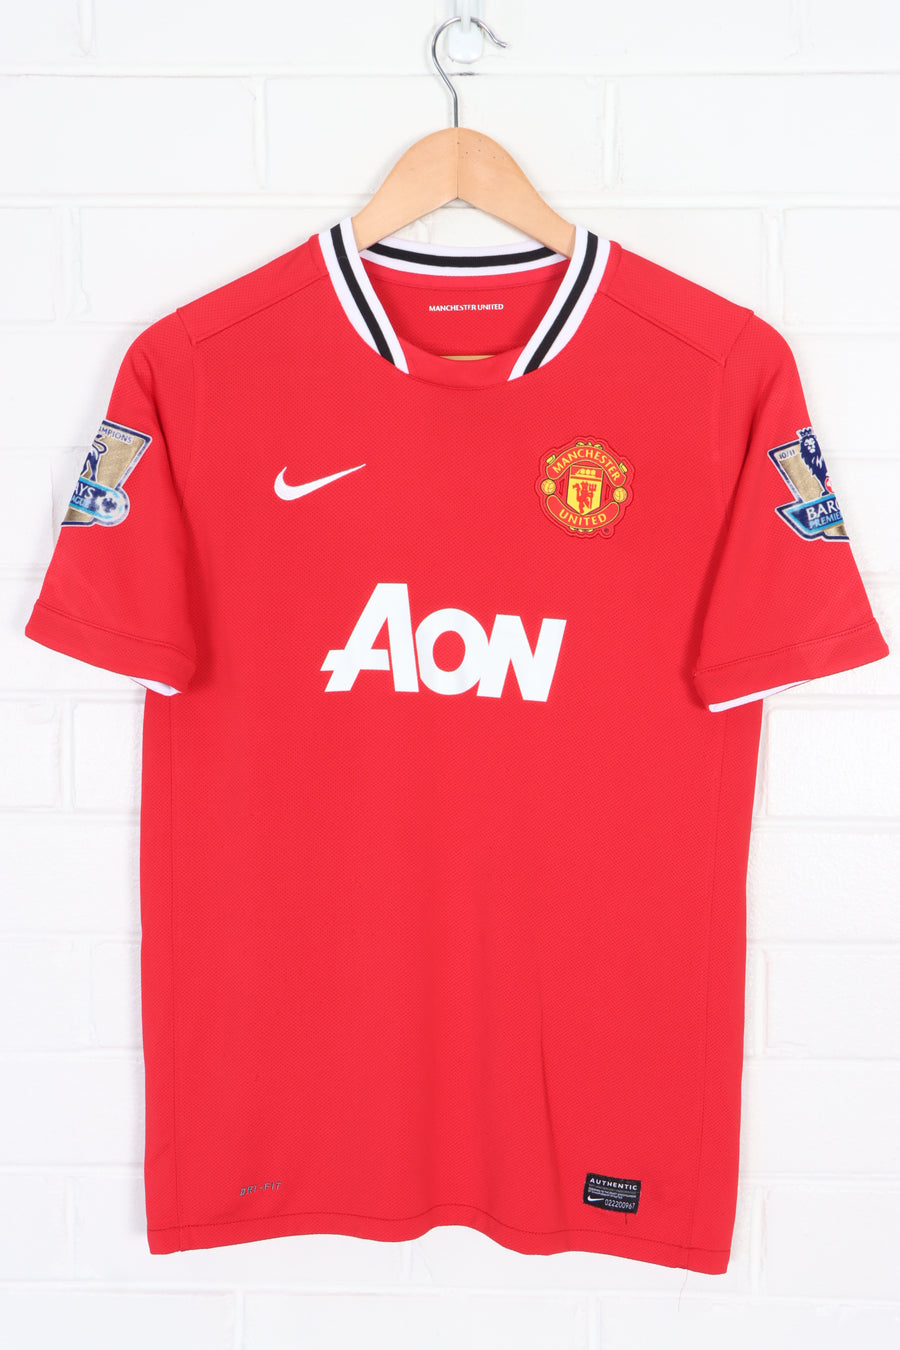 Manchester United 2011/2012 "Fultz" #9 NIKE Home Soccer Jersey (S)